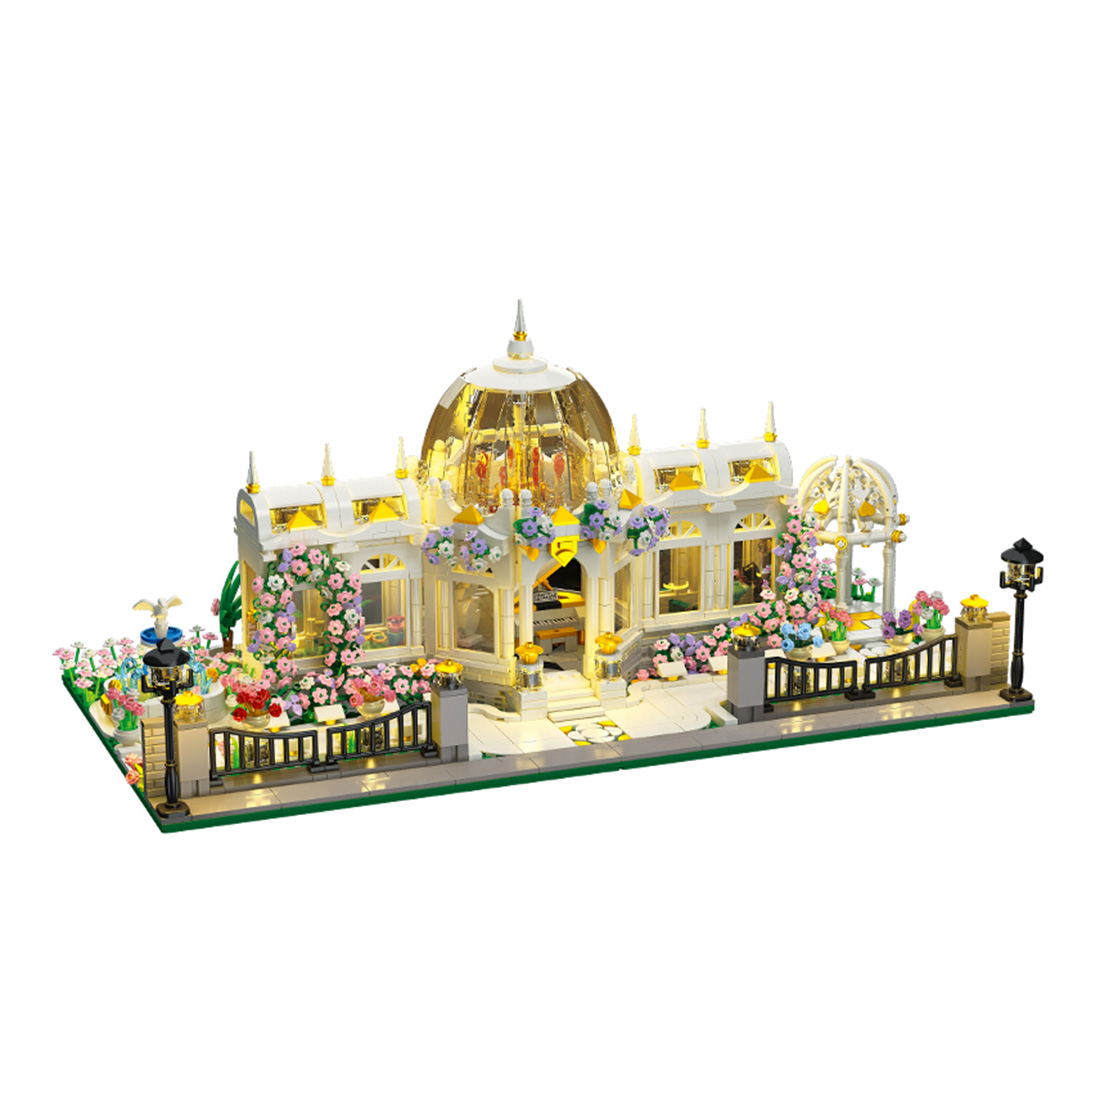 Classical Garden Square Model Assembly Toy Building Blocks Set (2397PCS/with Light)